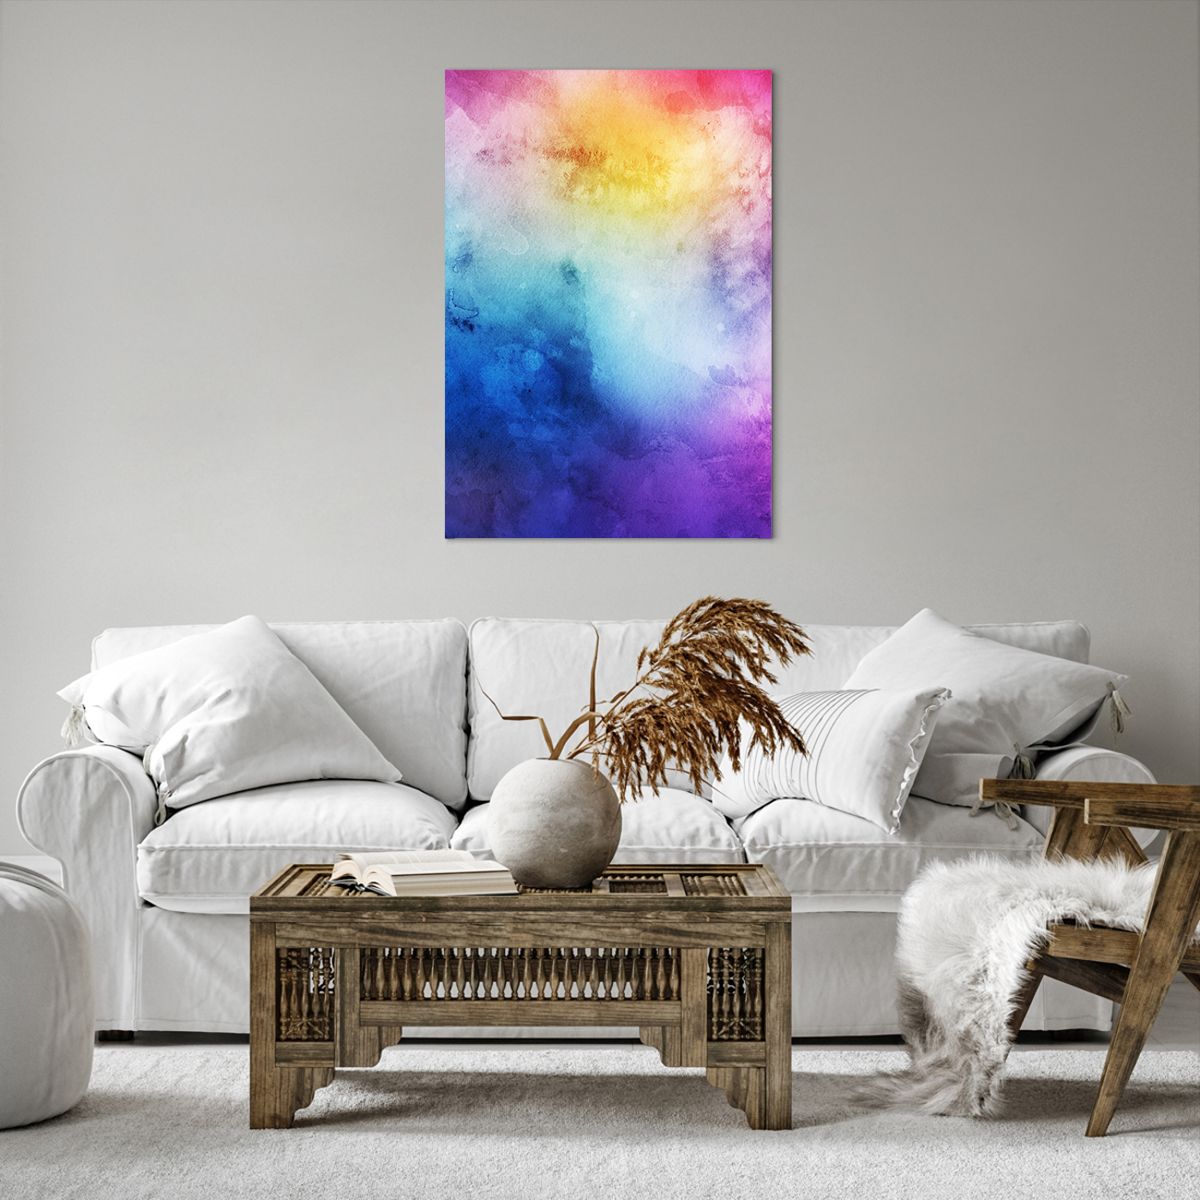 Canvas picture Abstraction, Canvas picture Art, Canvas picture Modern Pattern, Canvas picture The Colors, Canvas picture Painting